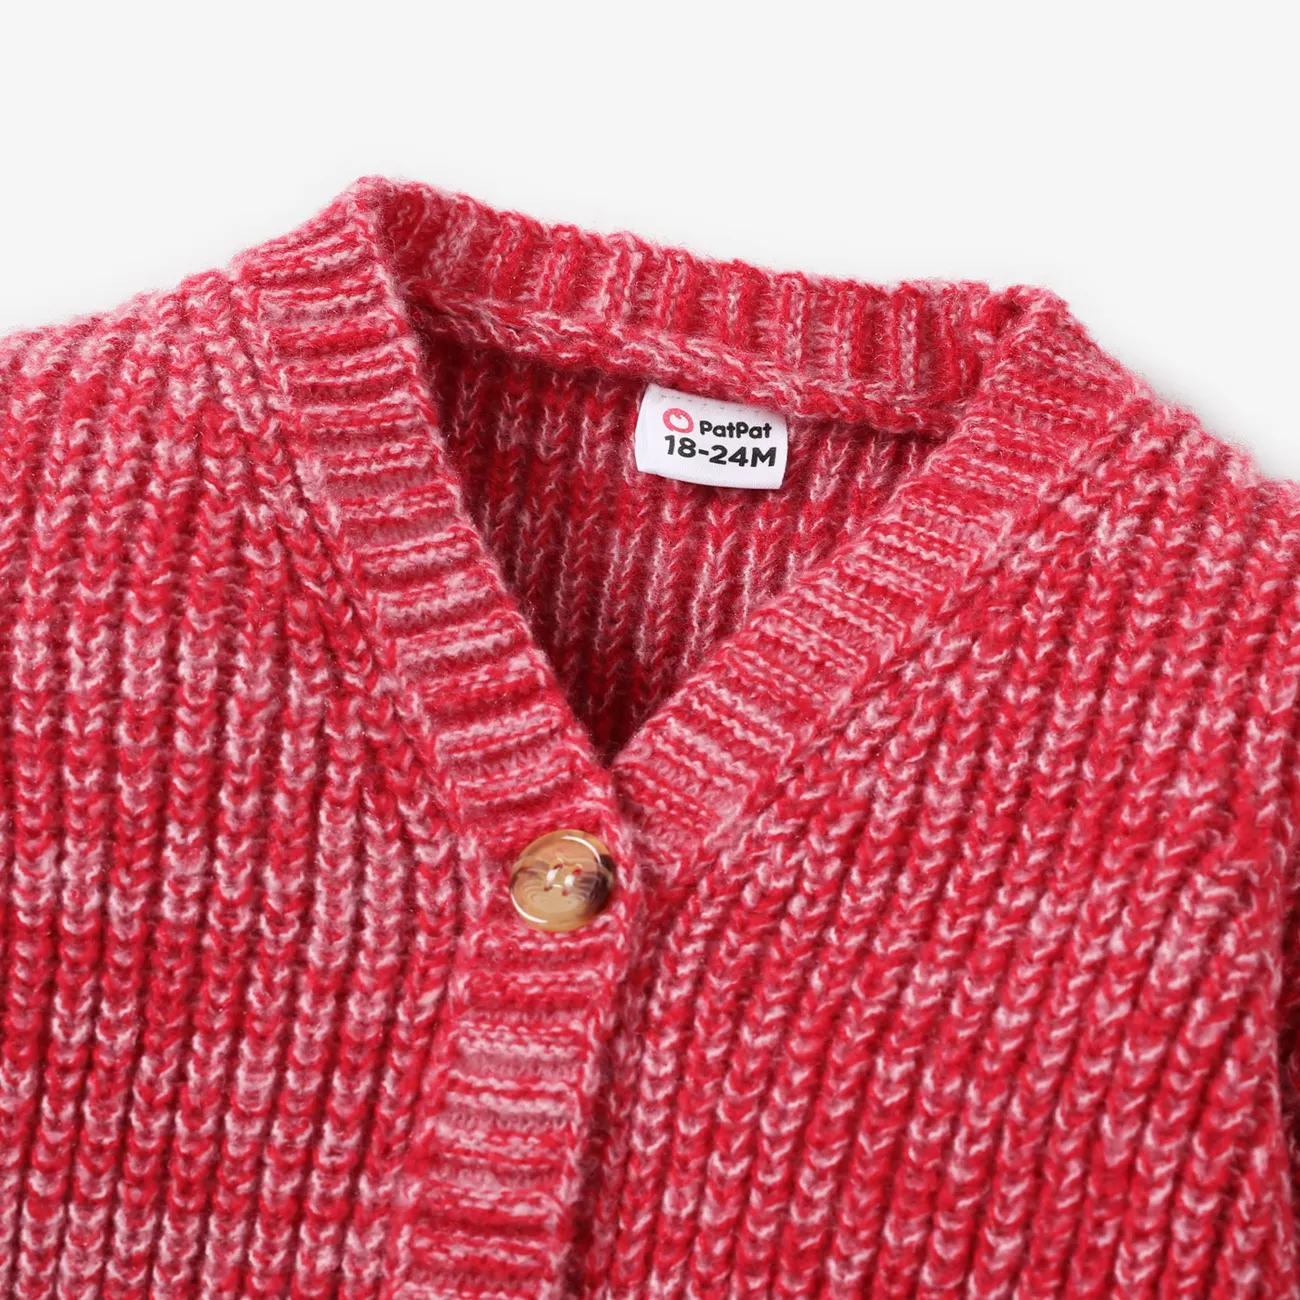 Toddler Girl Button Design Waffle Knit Sweater Cardigan Red/White big image 1